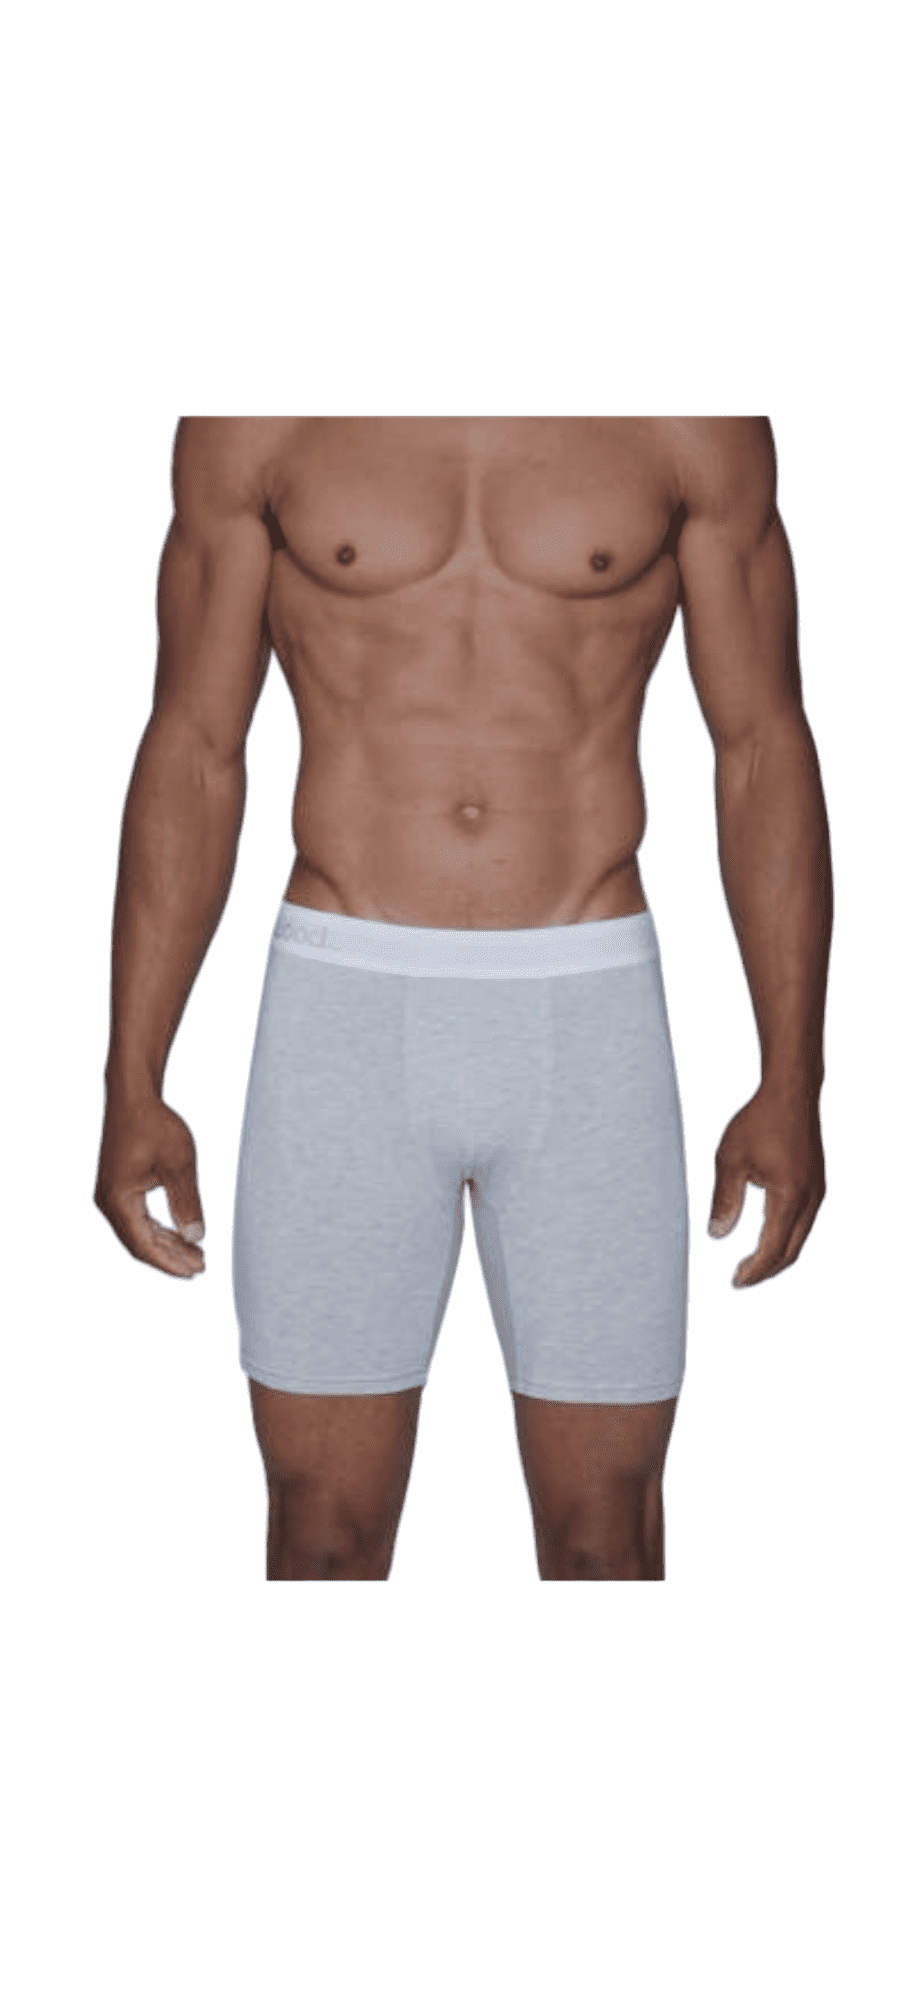 Wood Premium Biker Brief Heather Grey — Genuine Design Luxury Consignment Calgary, Alberta, Canada New and Pre-Owned Clothing, Shoes, Accessories.